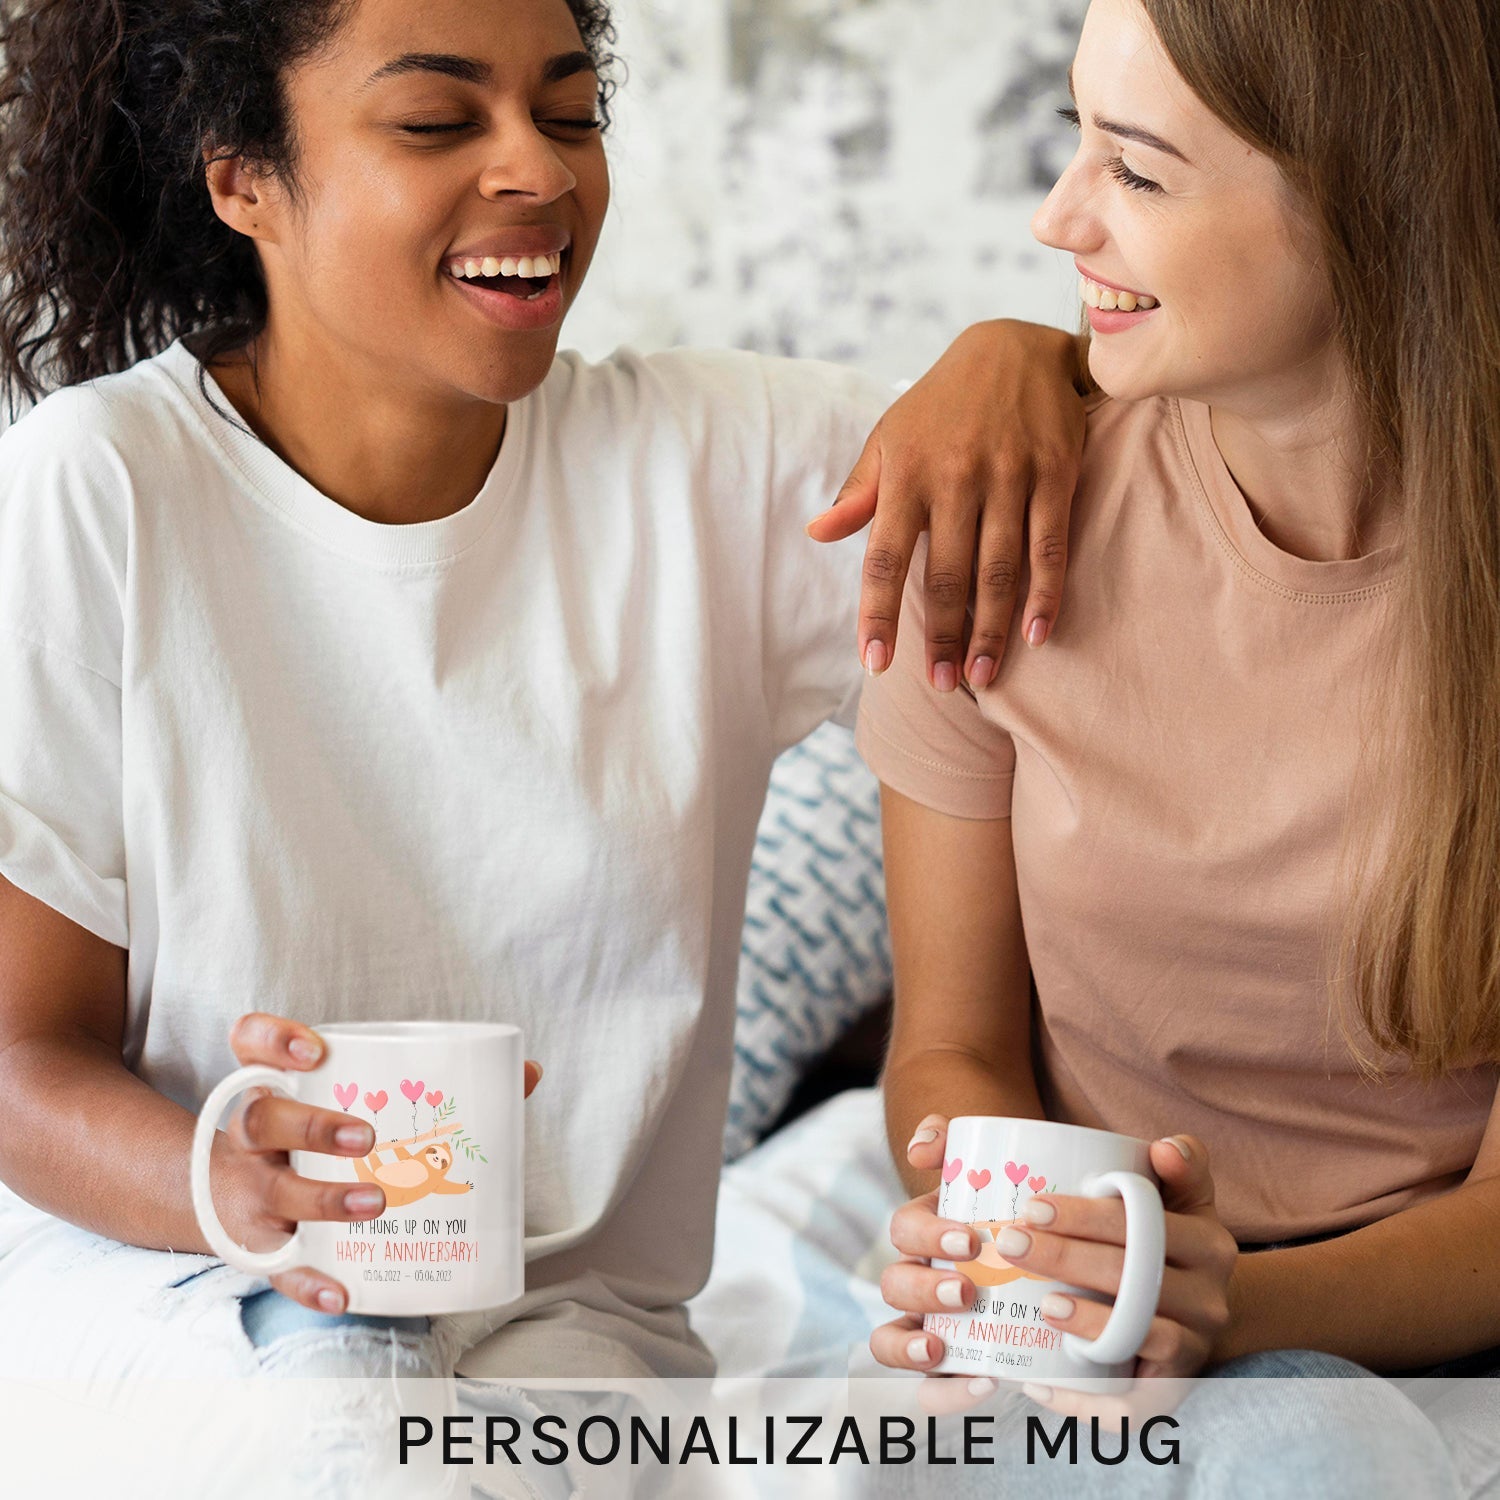 I'm Hung Up On You - Personalized Anniversary gift for Couple - Custom Mug - MyMindfulGifts